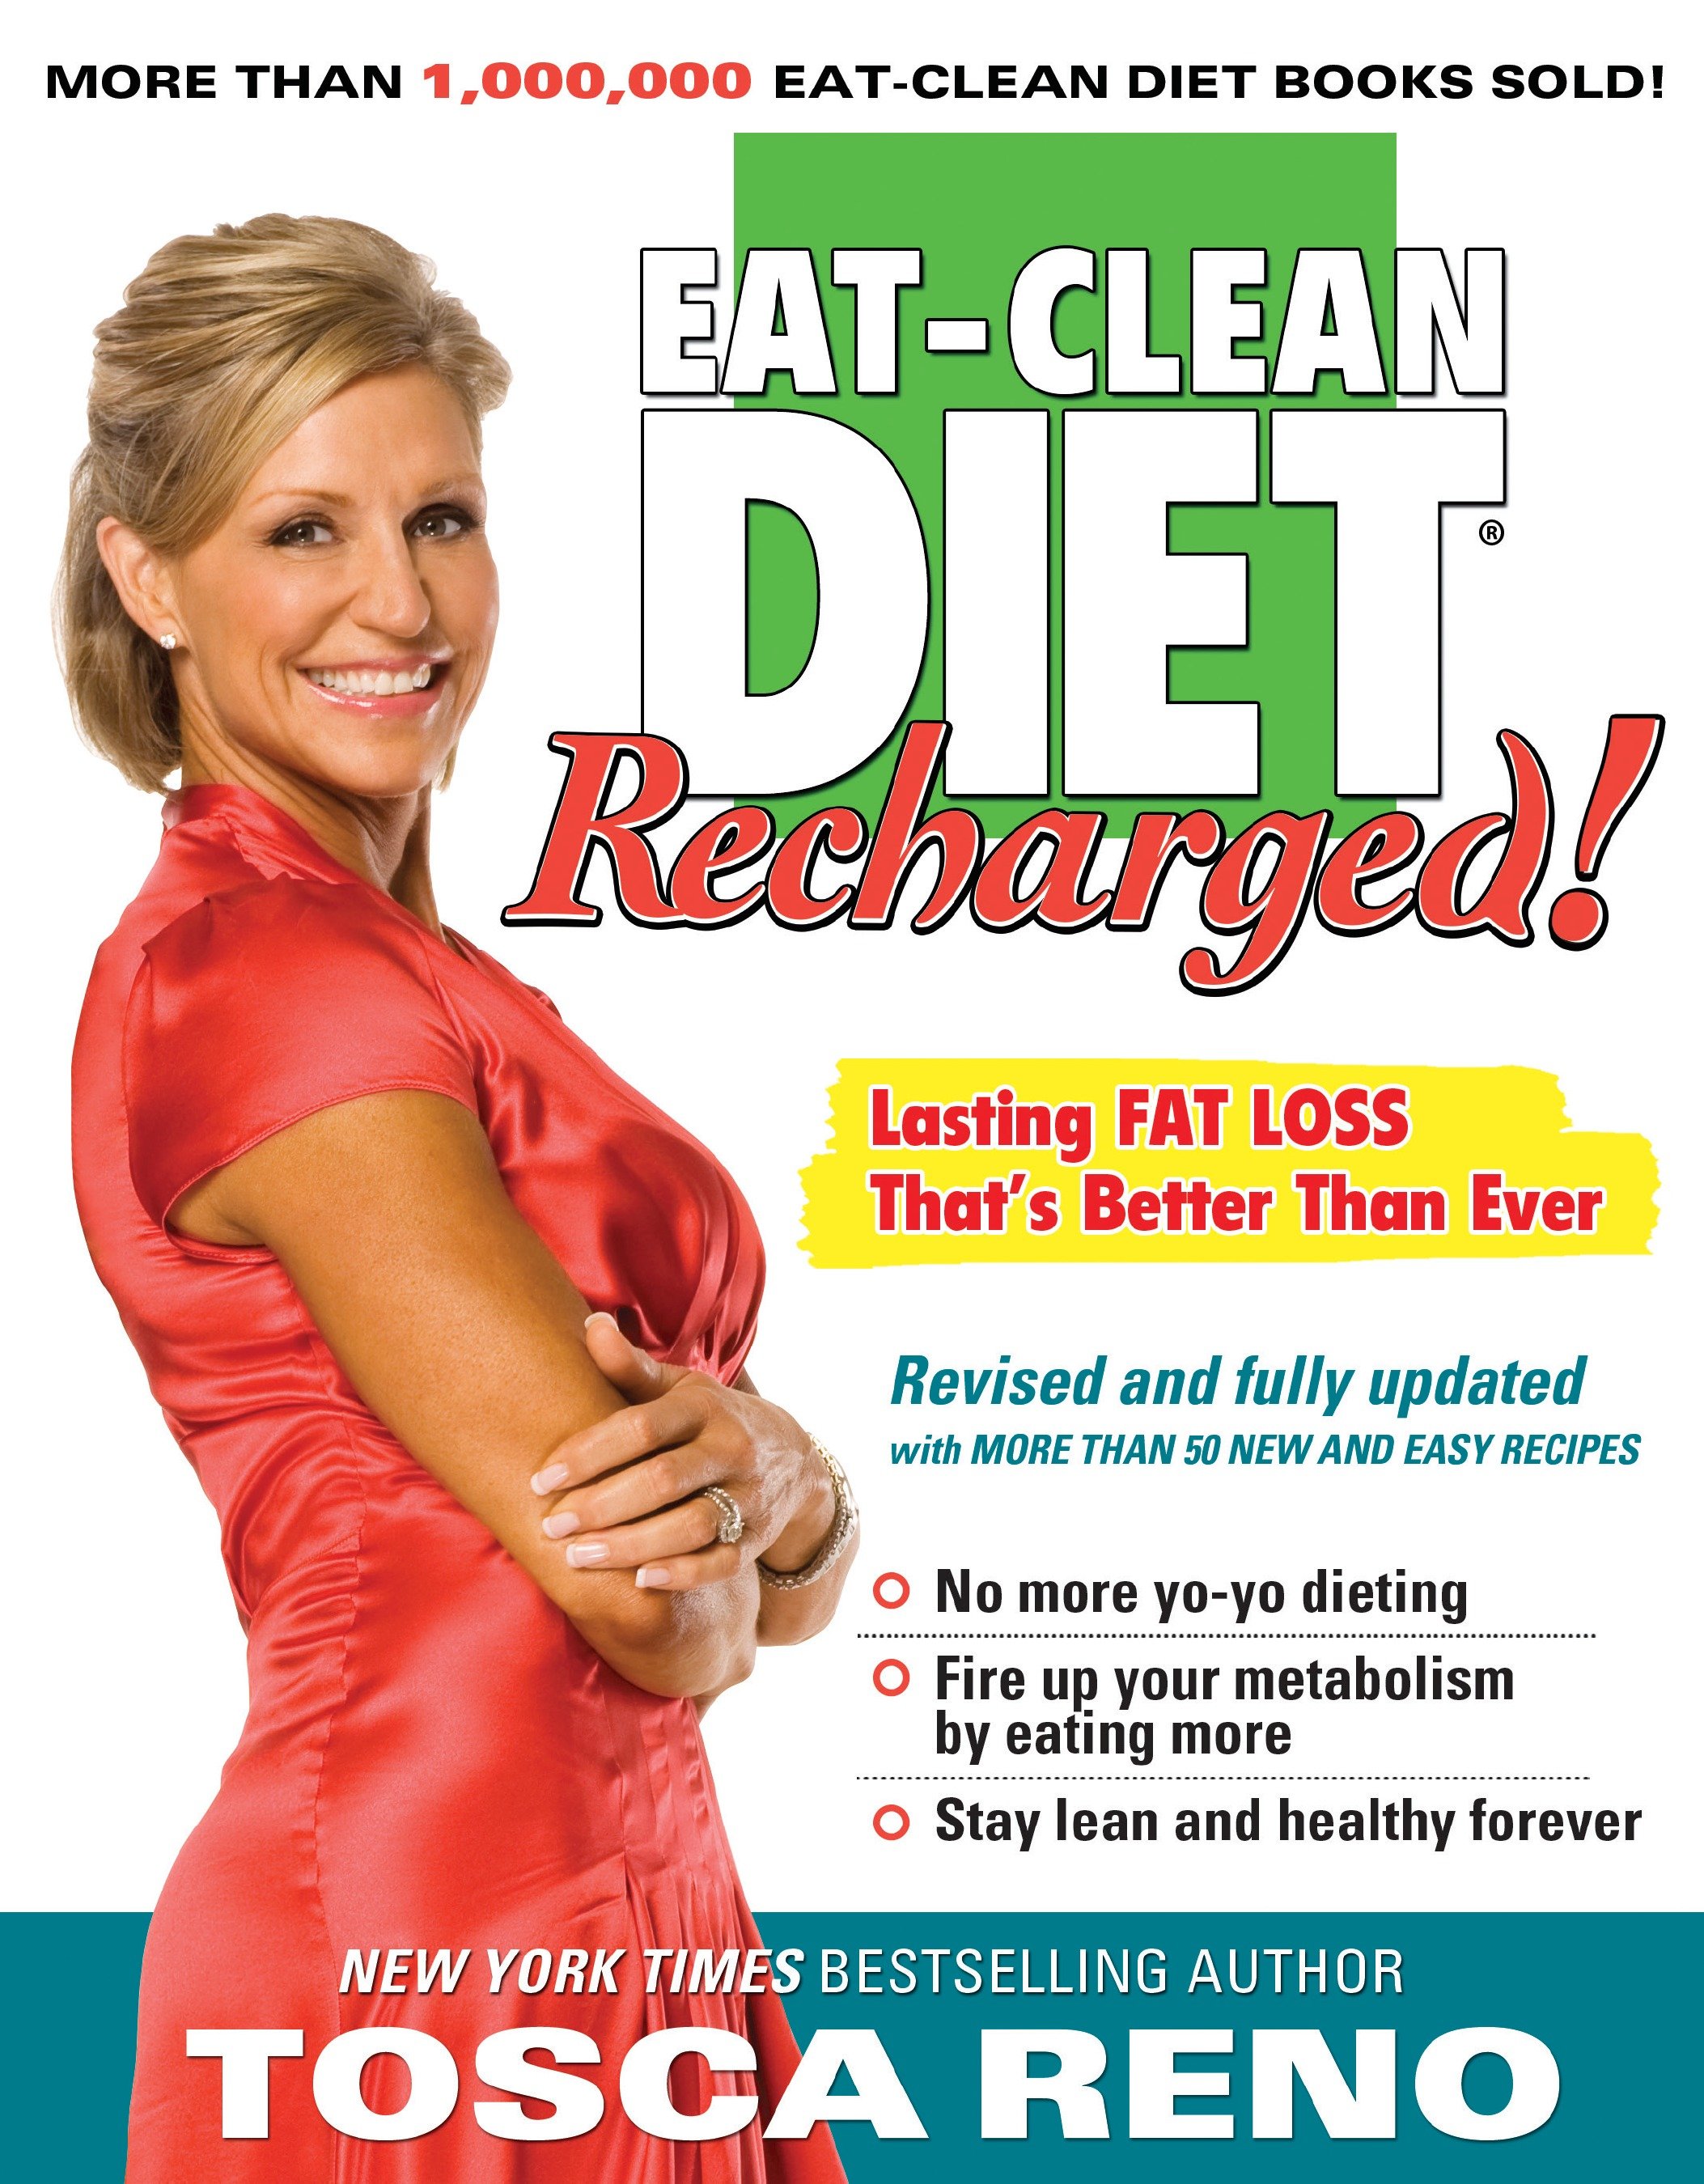 The eat-clean diet recharged! lasting fat loss that's better than ever cover image